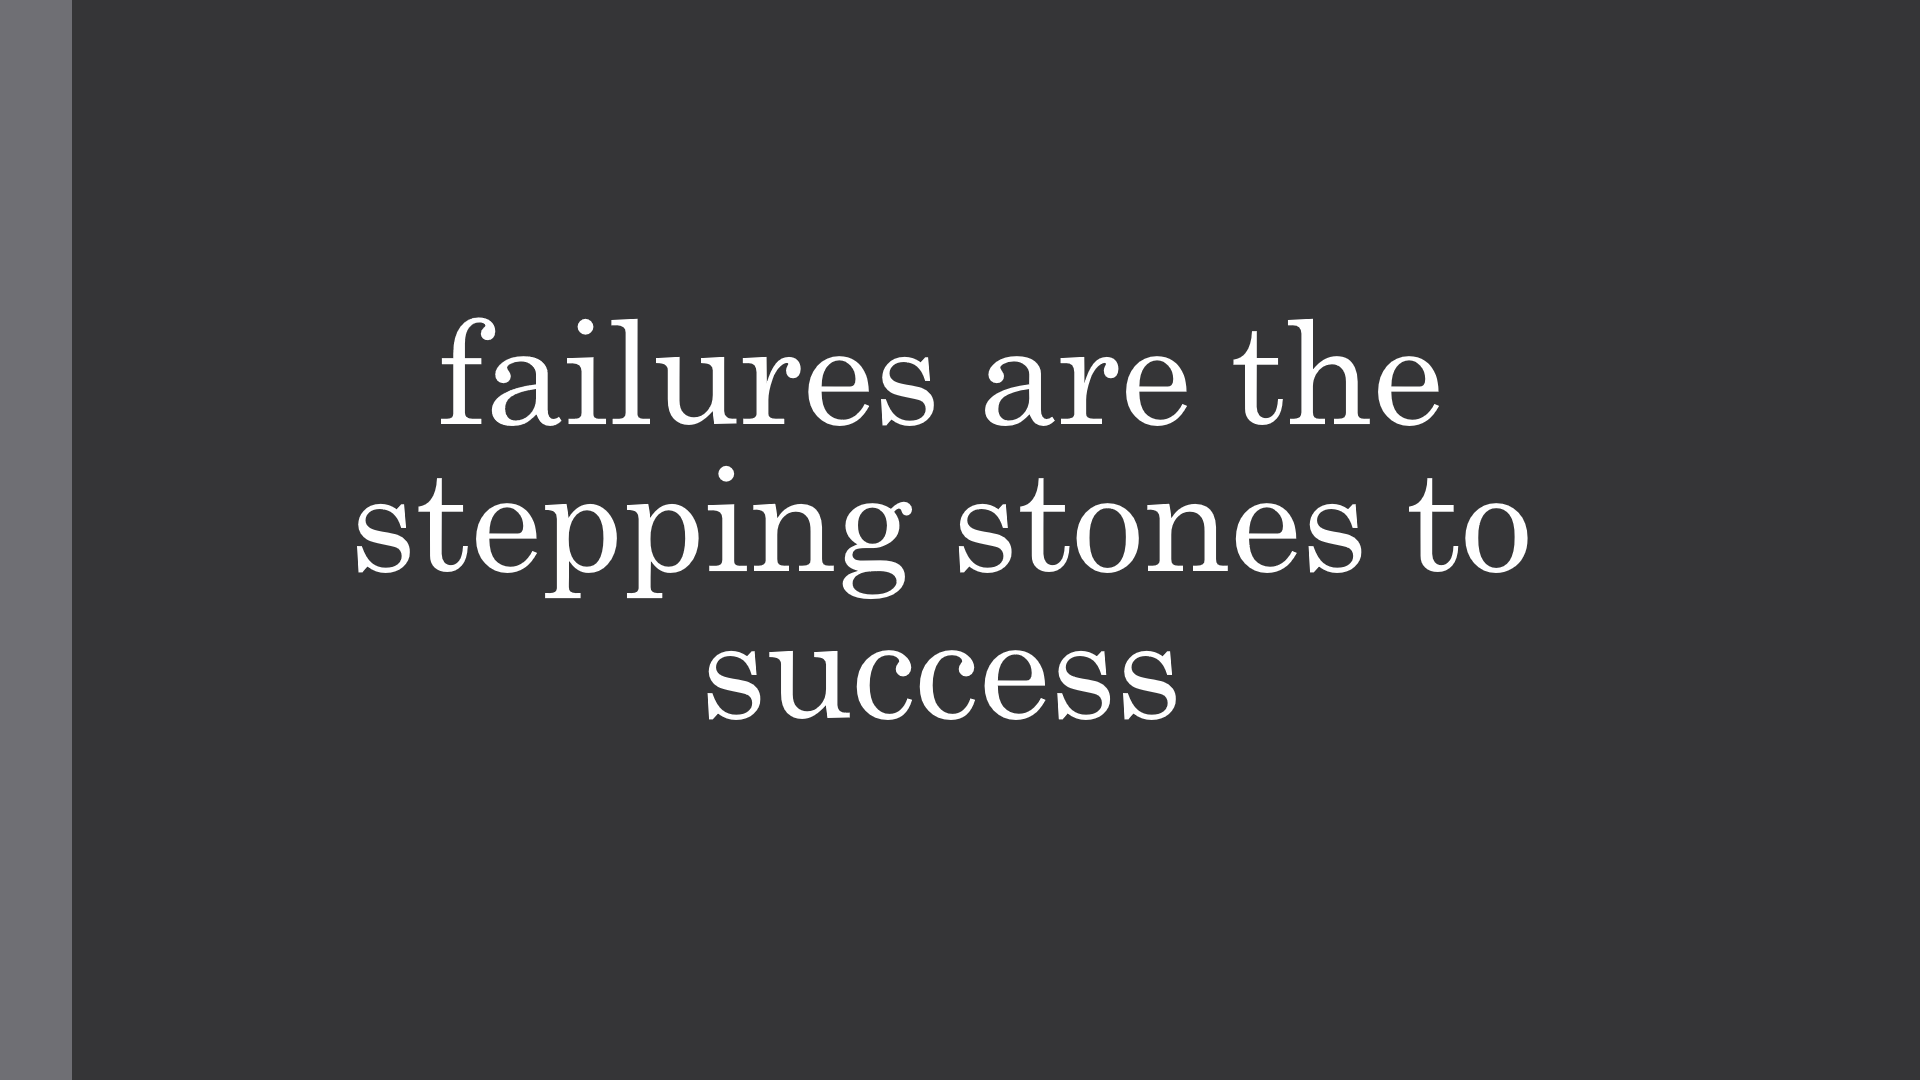 failures are the stepping stones to success